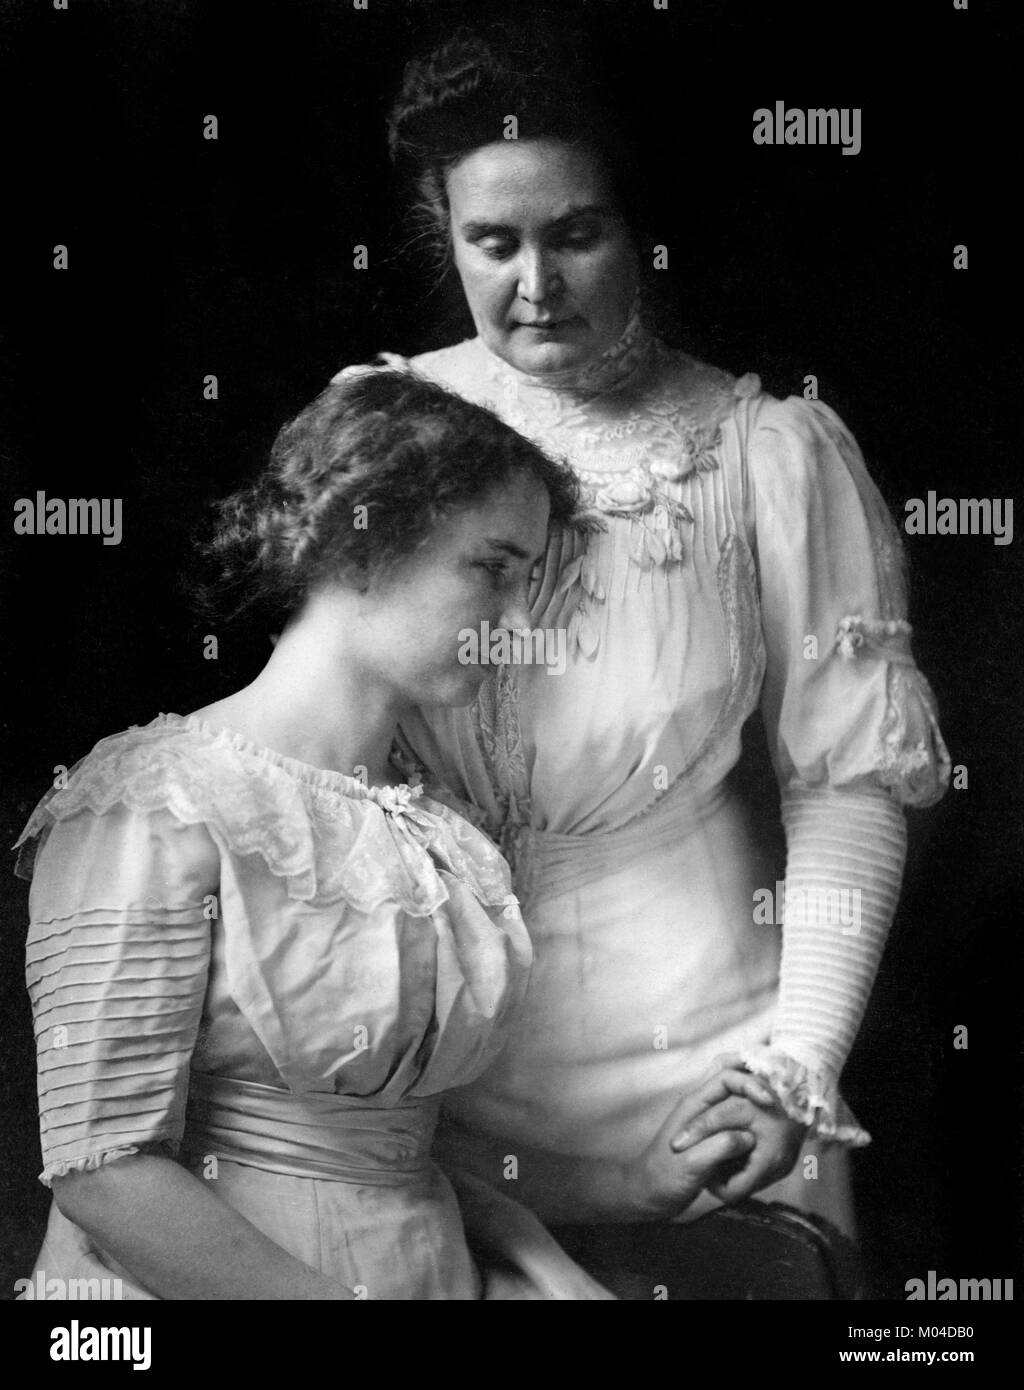 Helen Keller (1880-1968) and Anne Sullivan. Phototgraph of the deaf-blind author and political activist with her teacher and companion, c.1909 Stock Photo